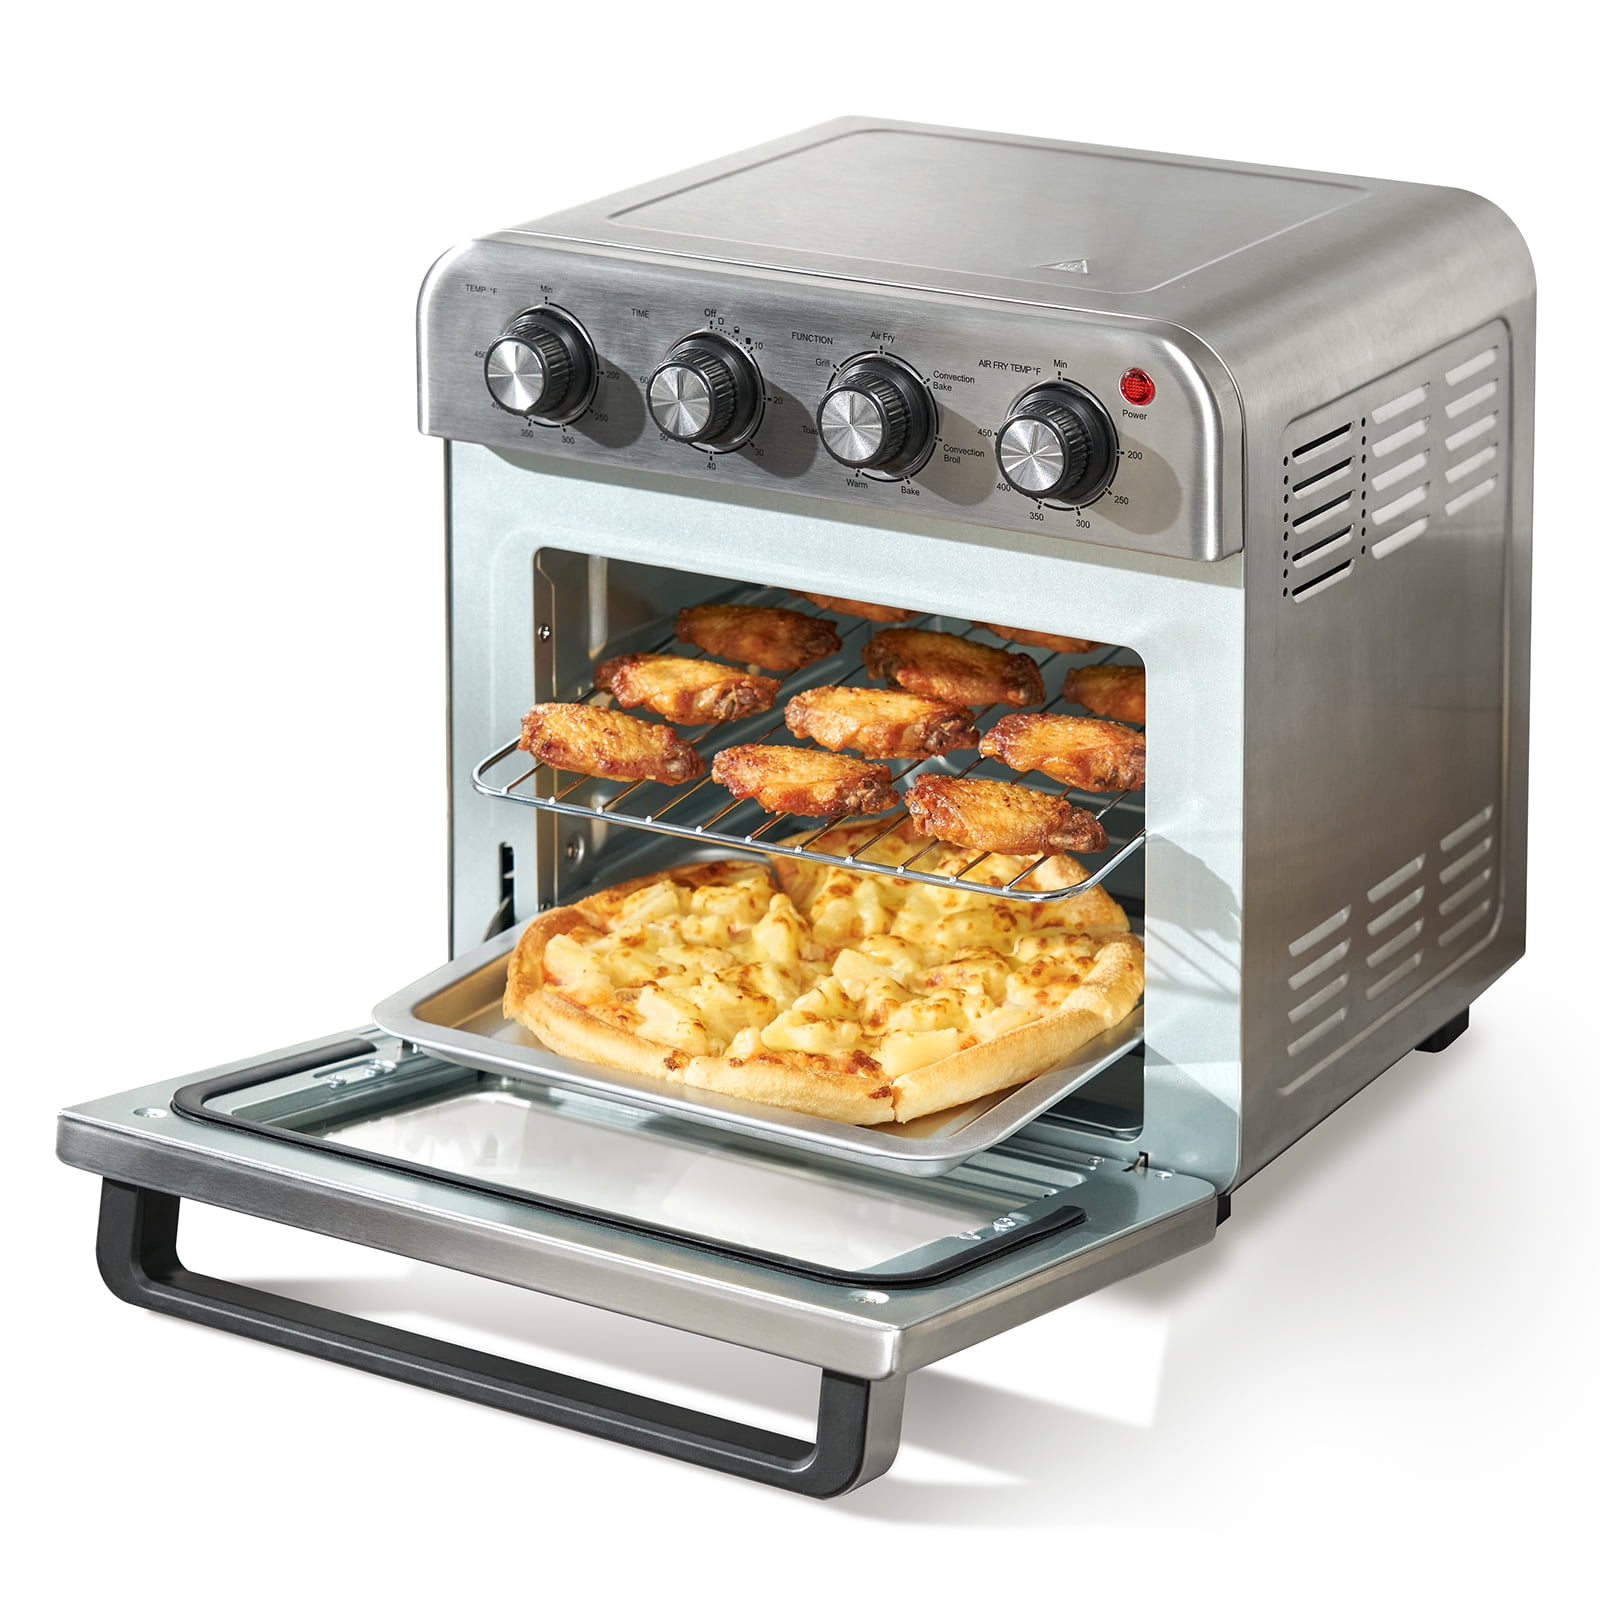 What Makes An Air Fryer And Convection Oven Different?